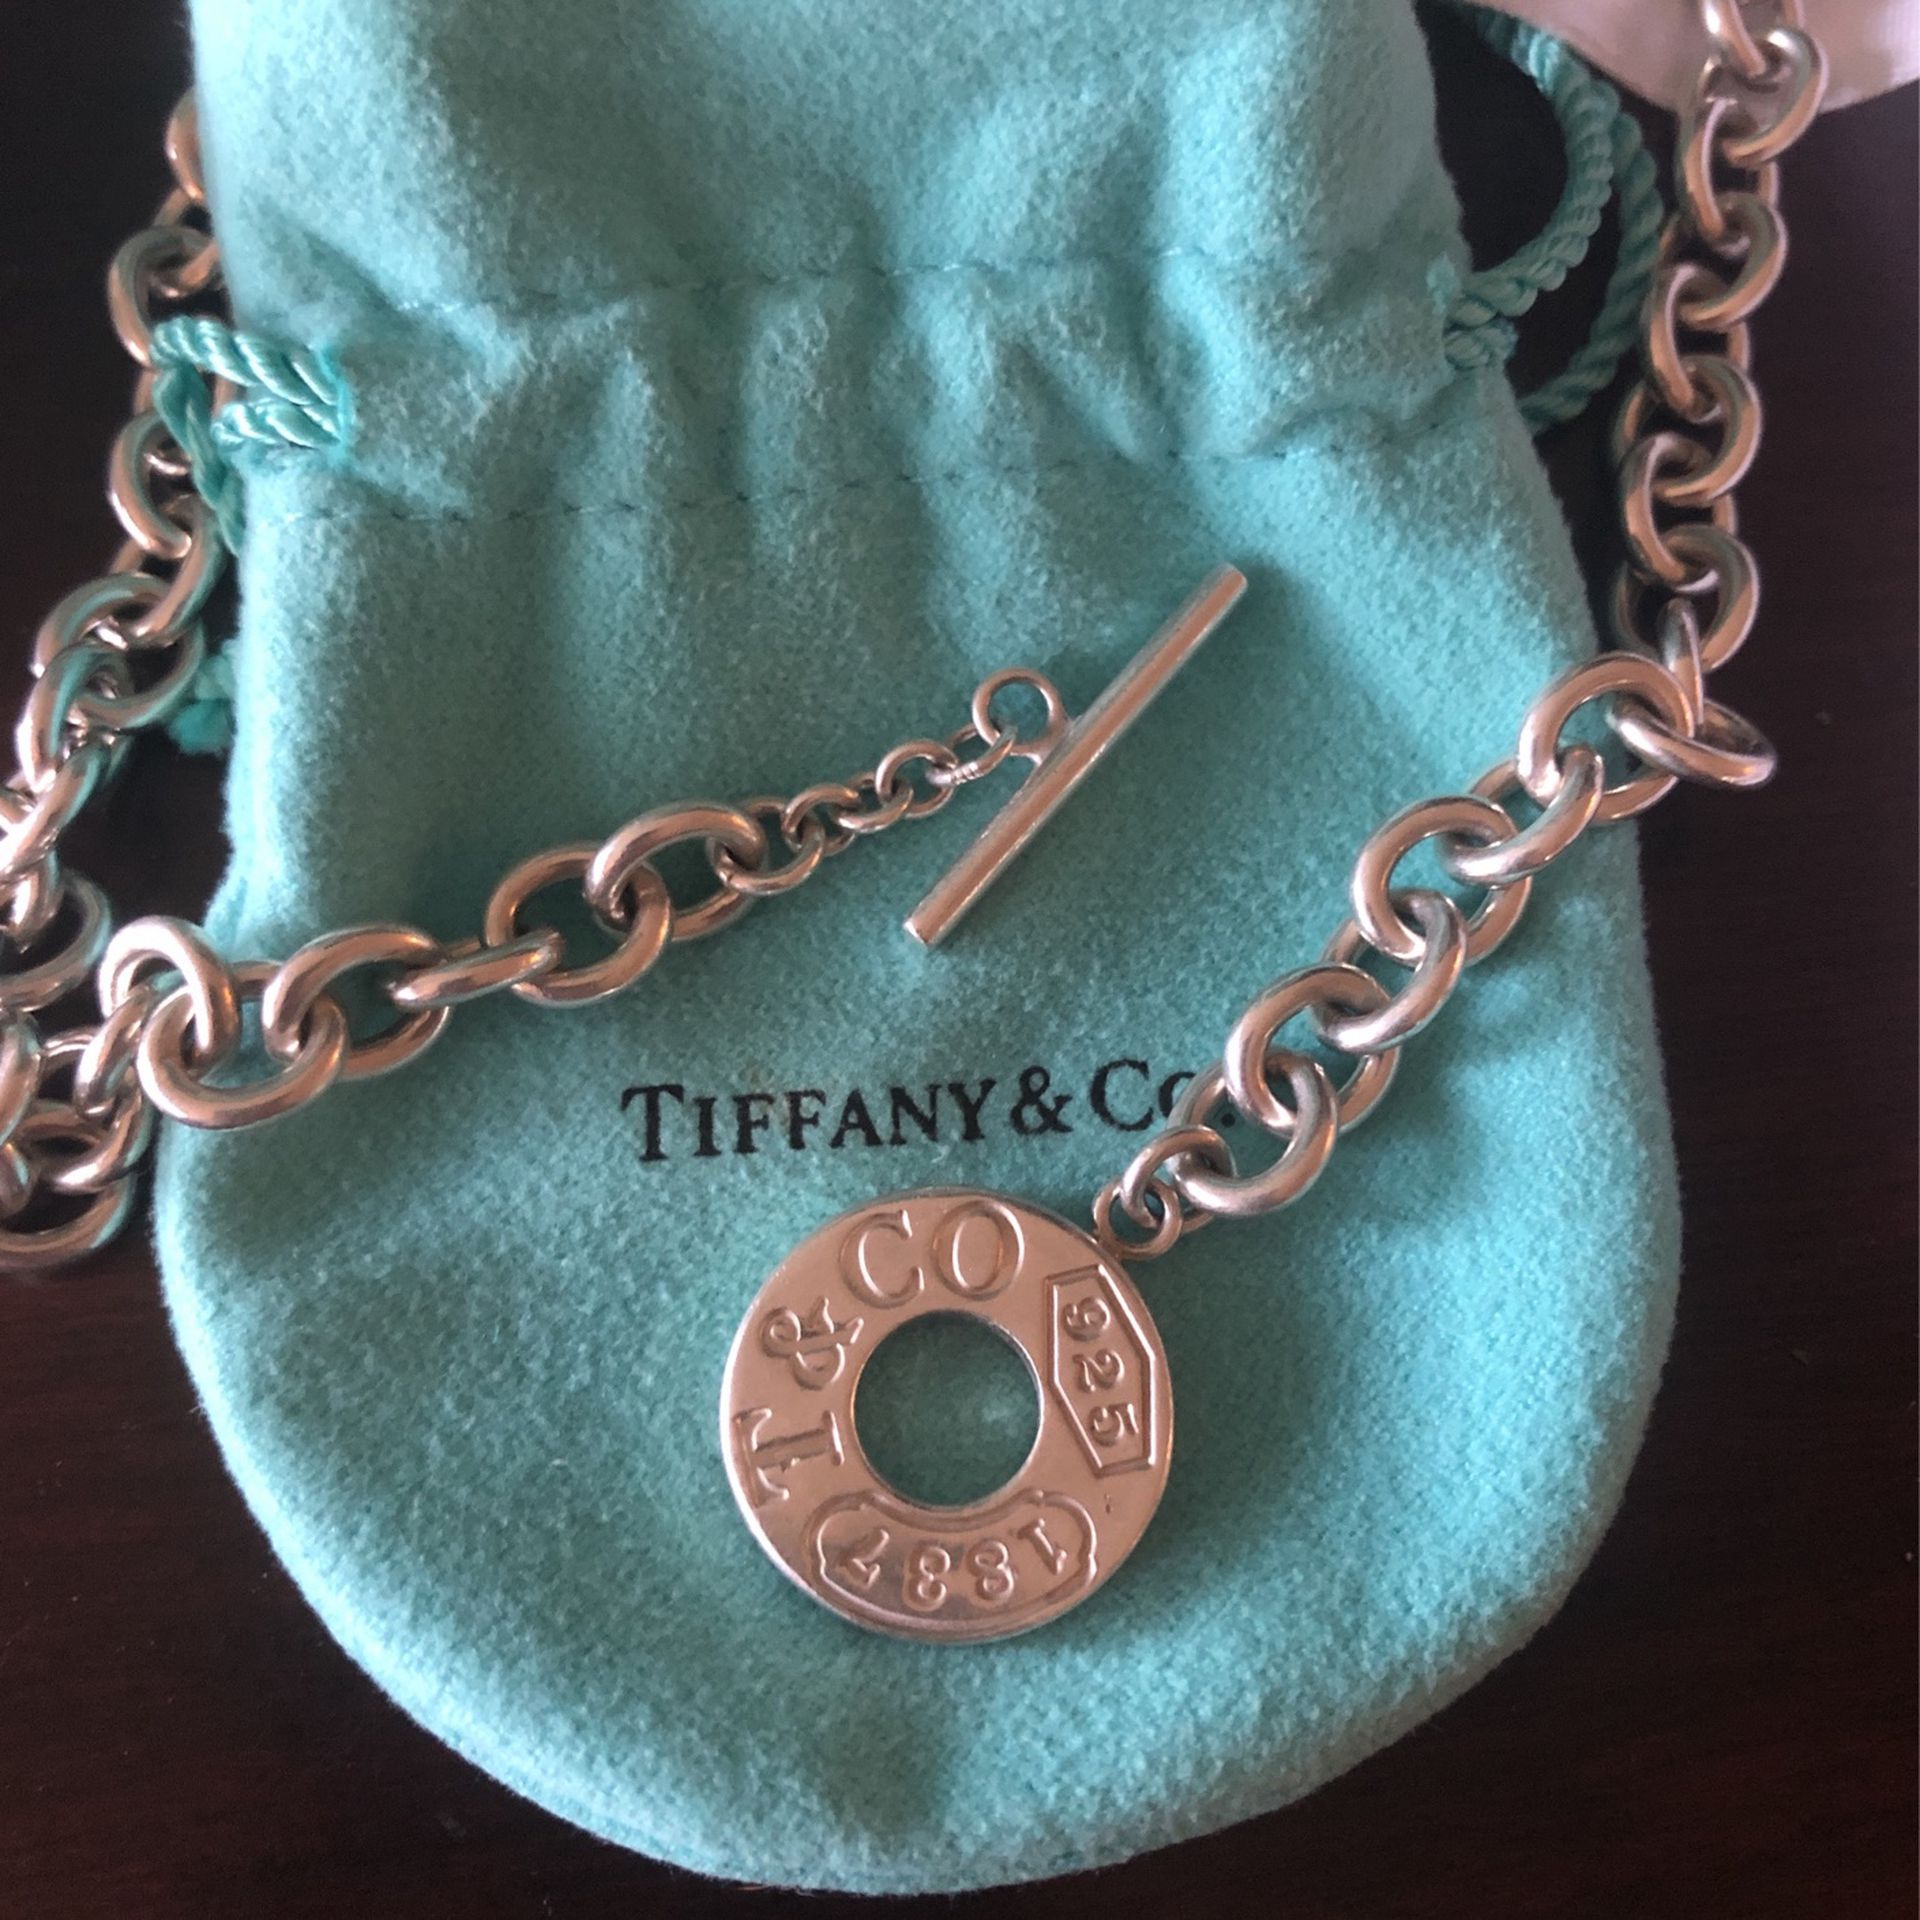 Authentic Tiffany’s Necklace With Original Packaging